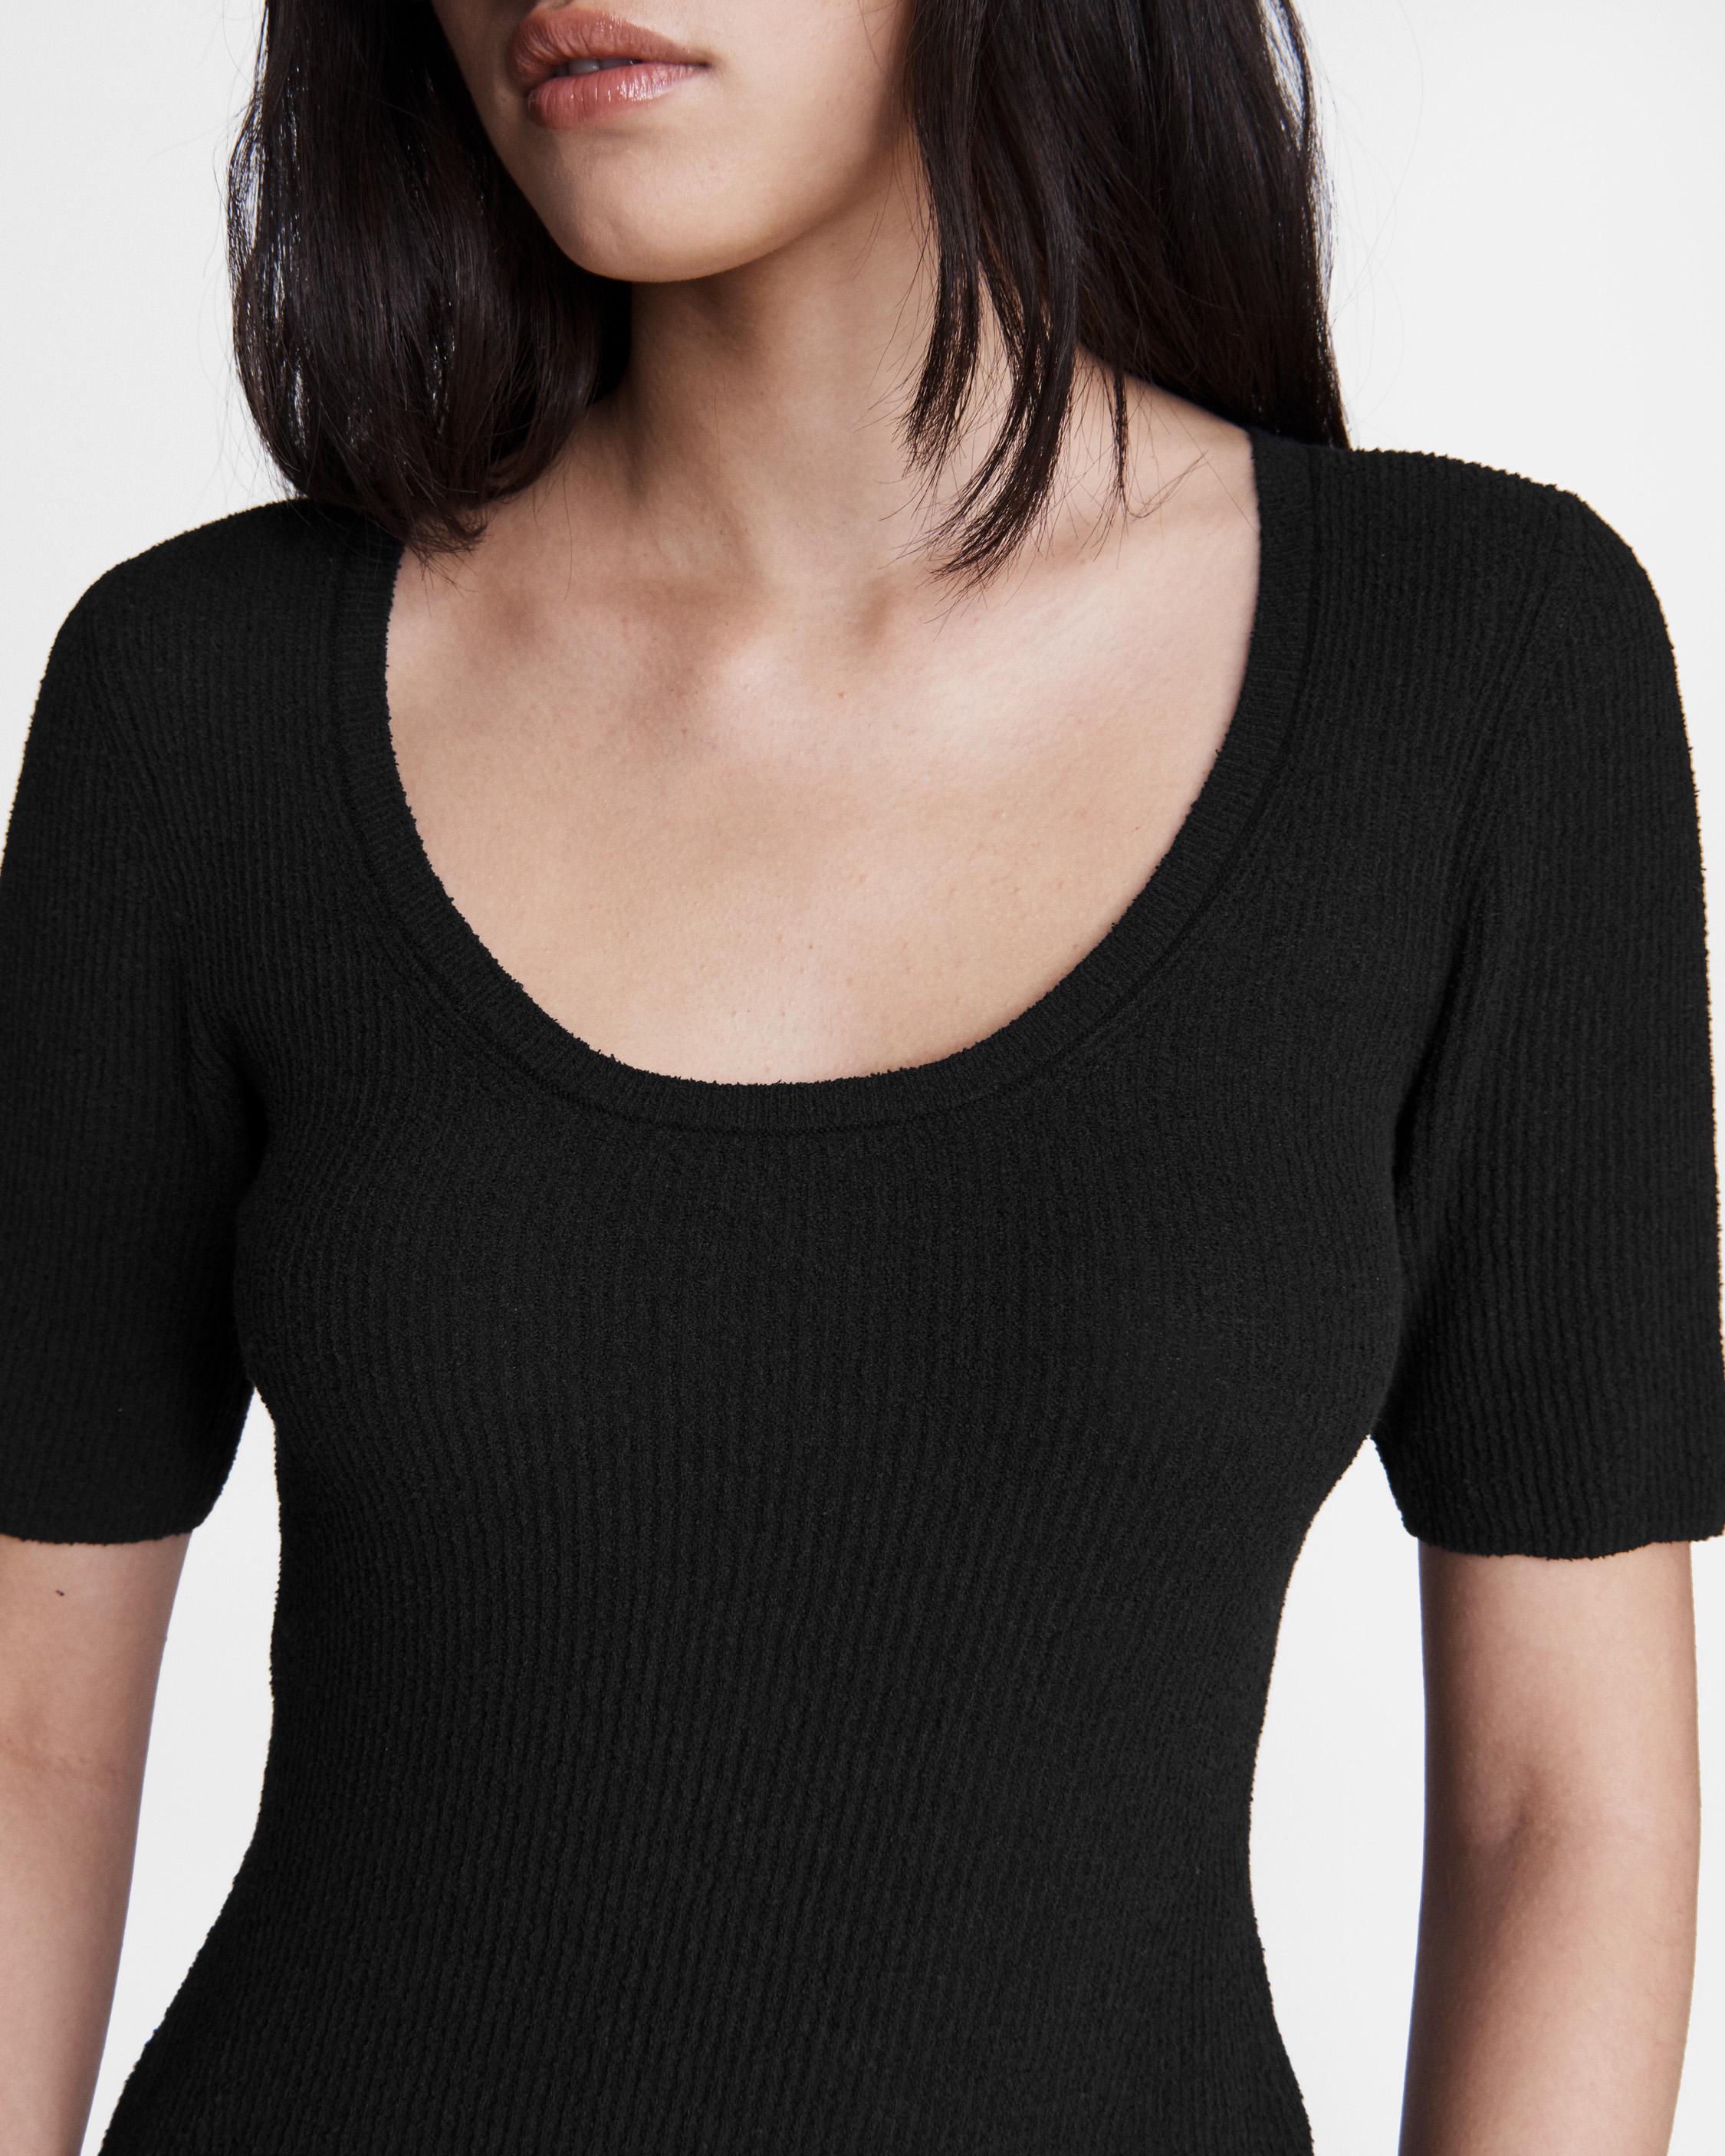 https://cdn.media.amplience.net/i/rb/WAS21P0011YL11-001-G/Sunny-Cotton-Scoop-Neck-001?$large$&fmt=auto